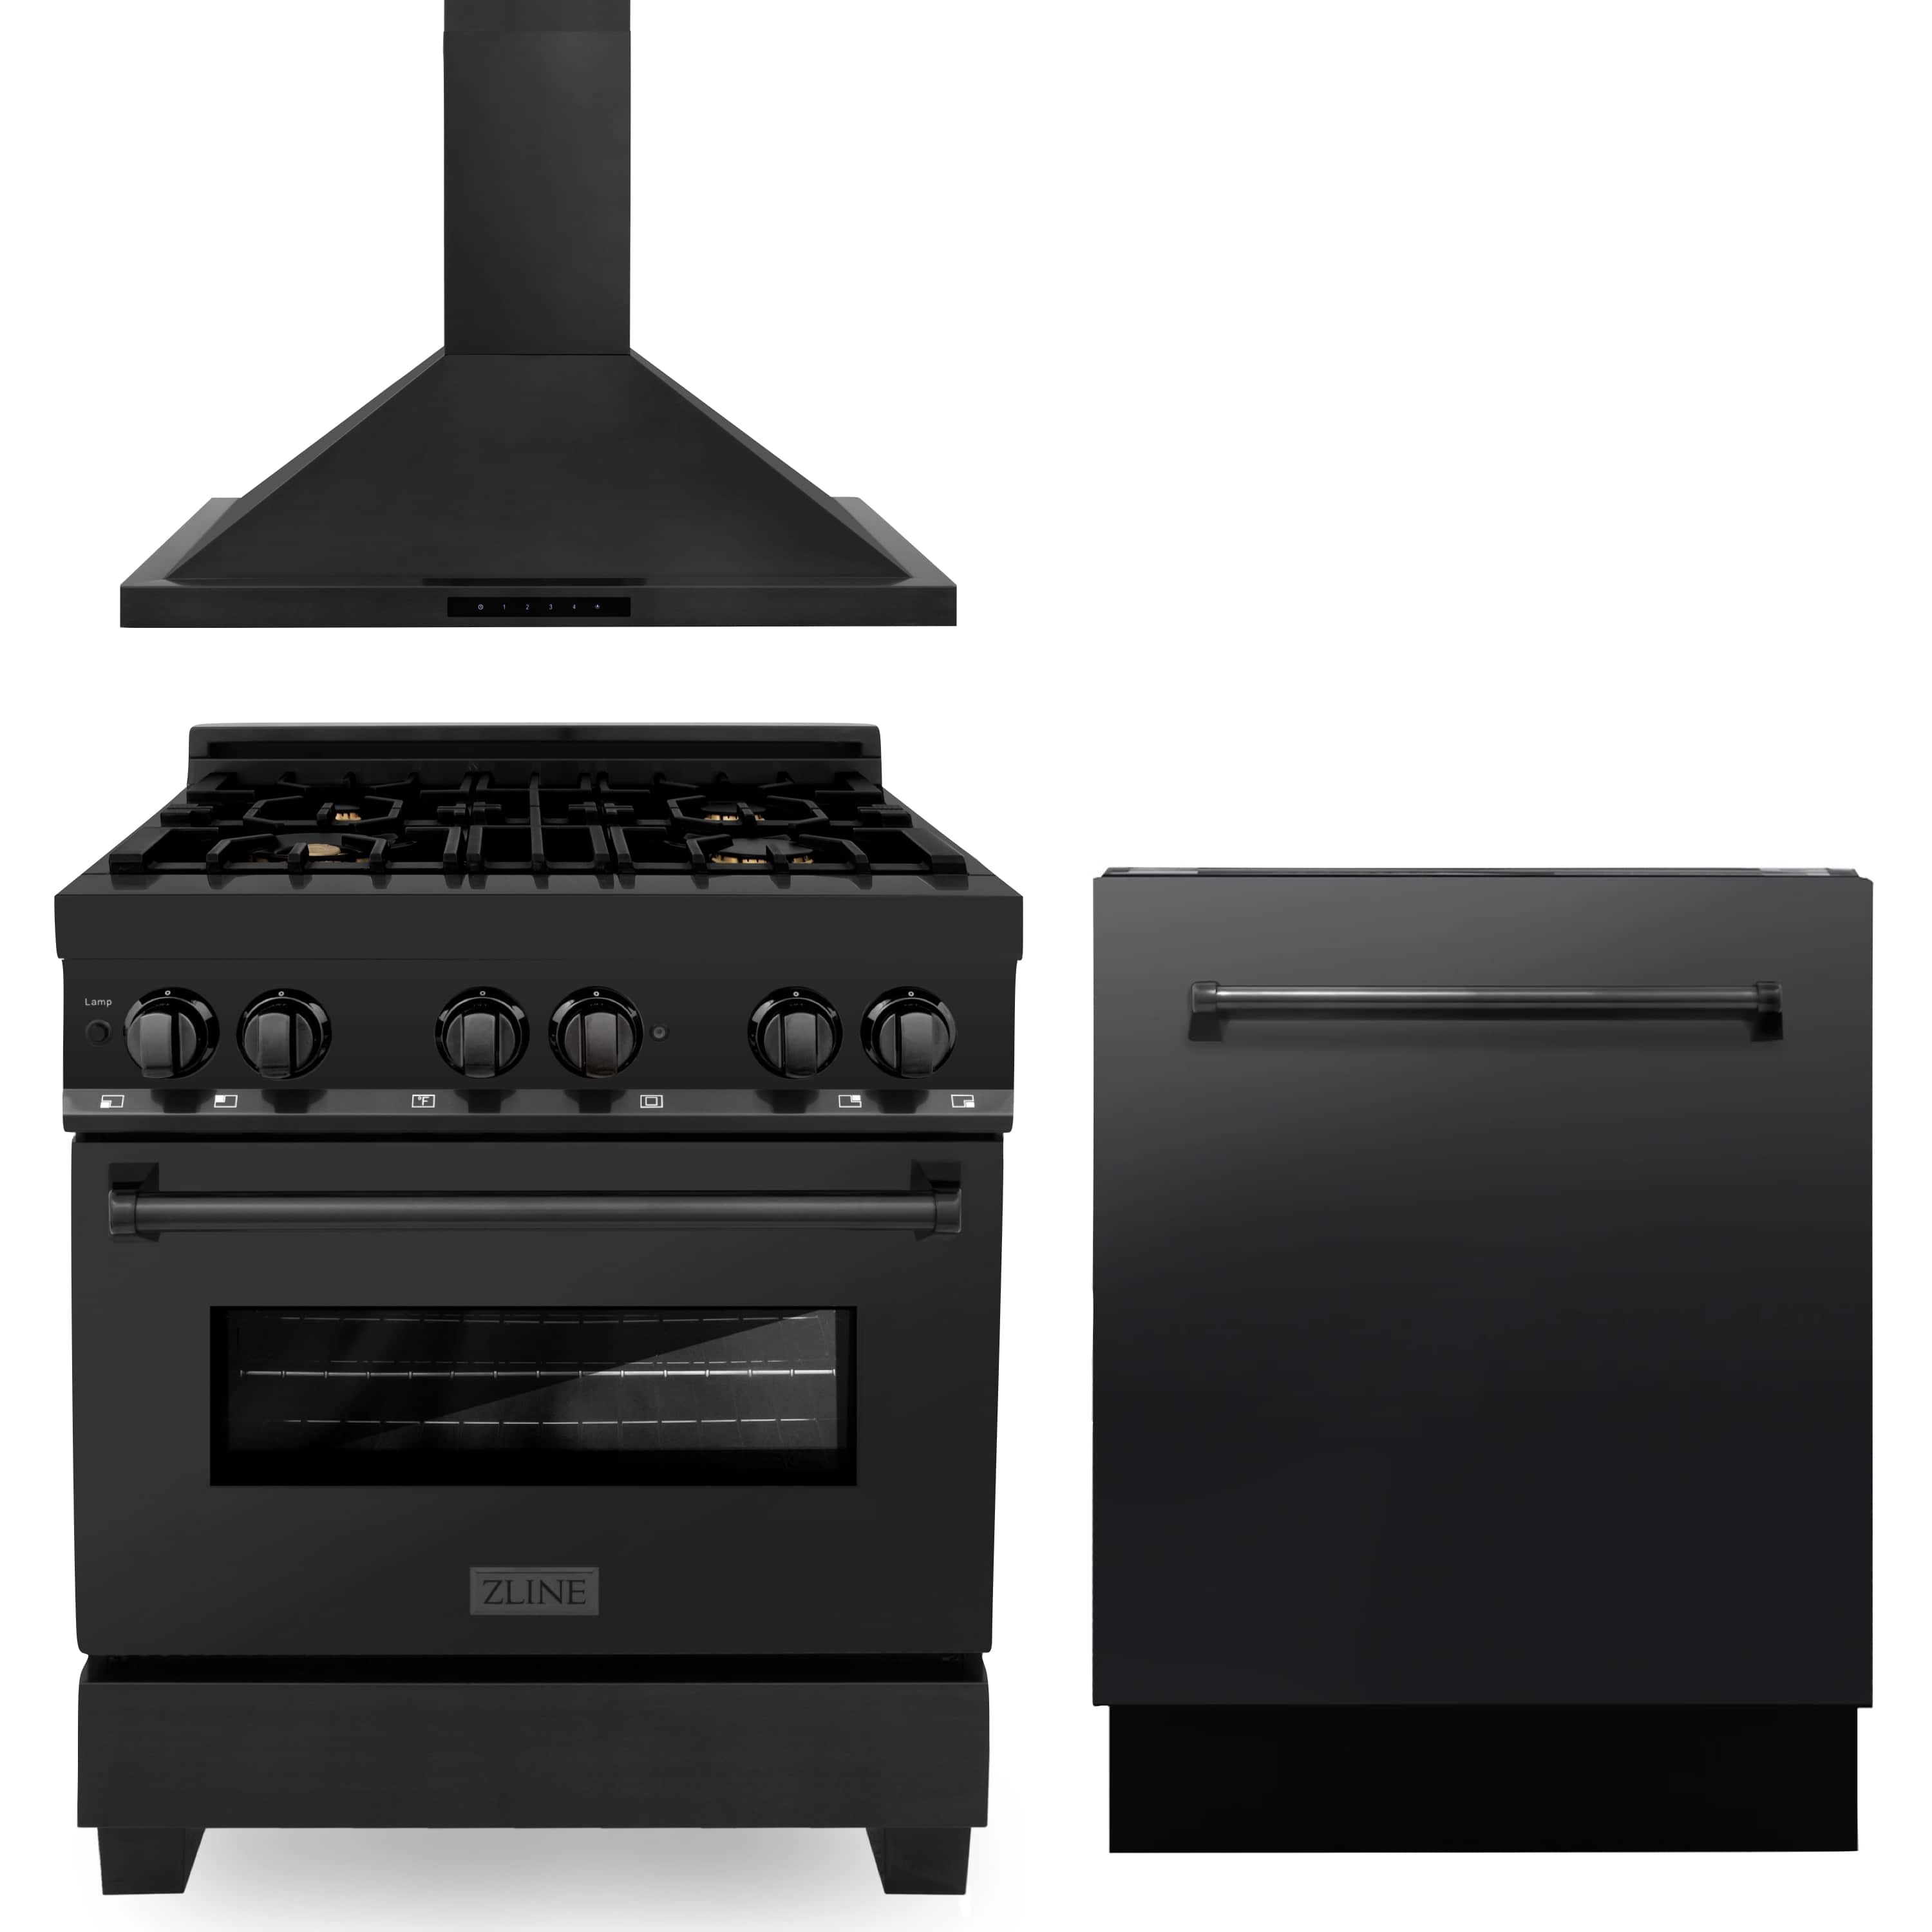 ZLINE 3-Piece Appliance Package - 30-Inch Dual Fuel Range with Brass Burners, Convertible Wall Mount Hood, and 3-Rack Dishwasher in Black Stainless Steel (3KP-RABRH30-DWV)